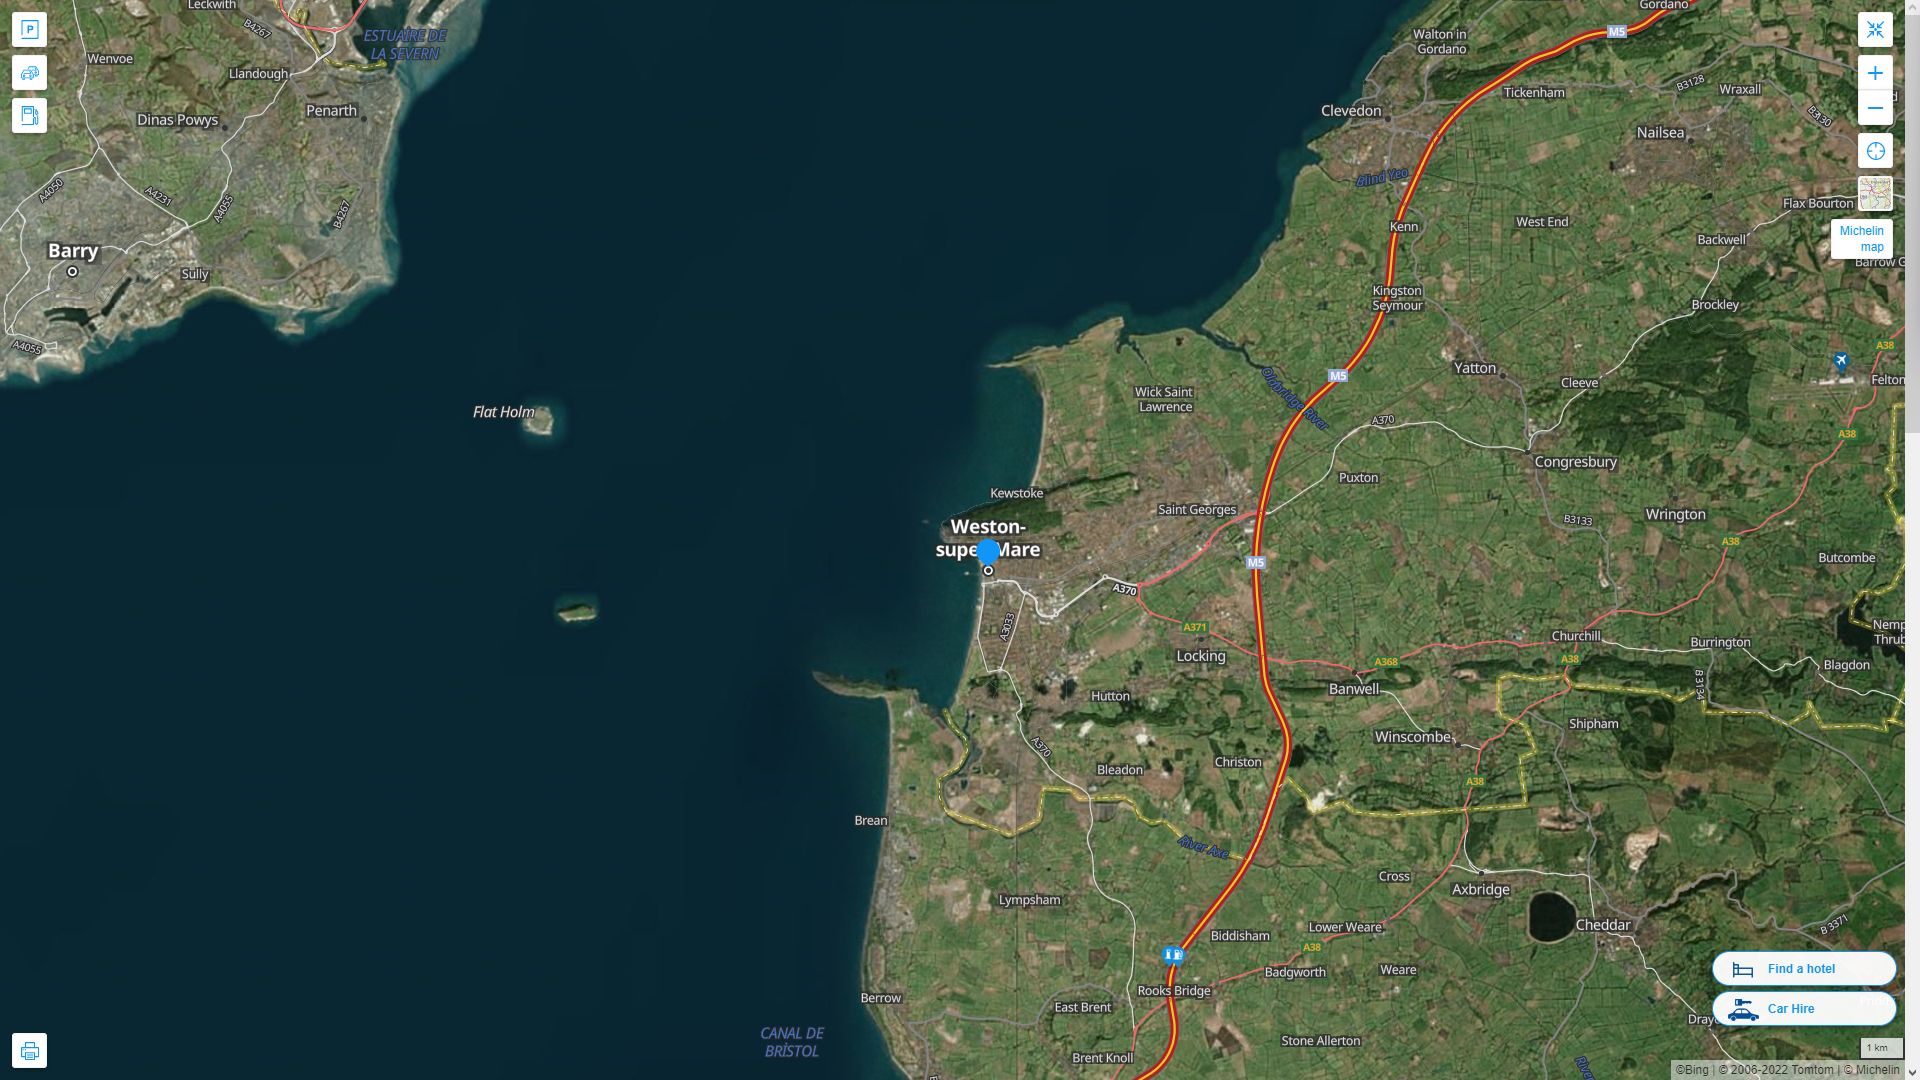 Weston super Mare Highway and Road Map with Satellite View